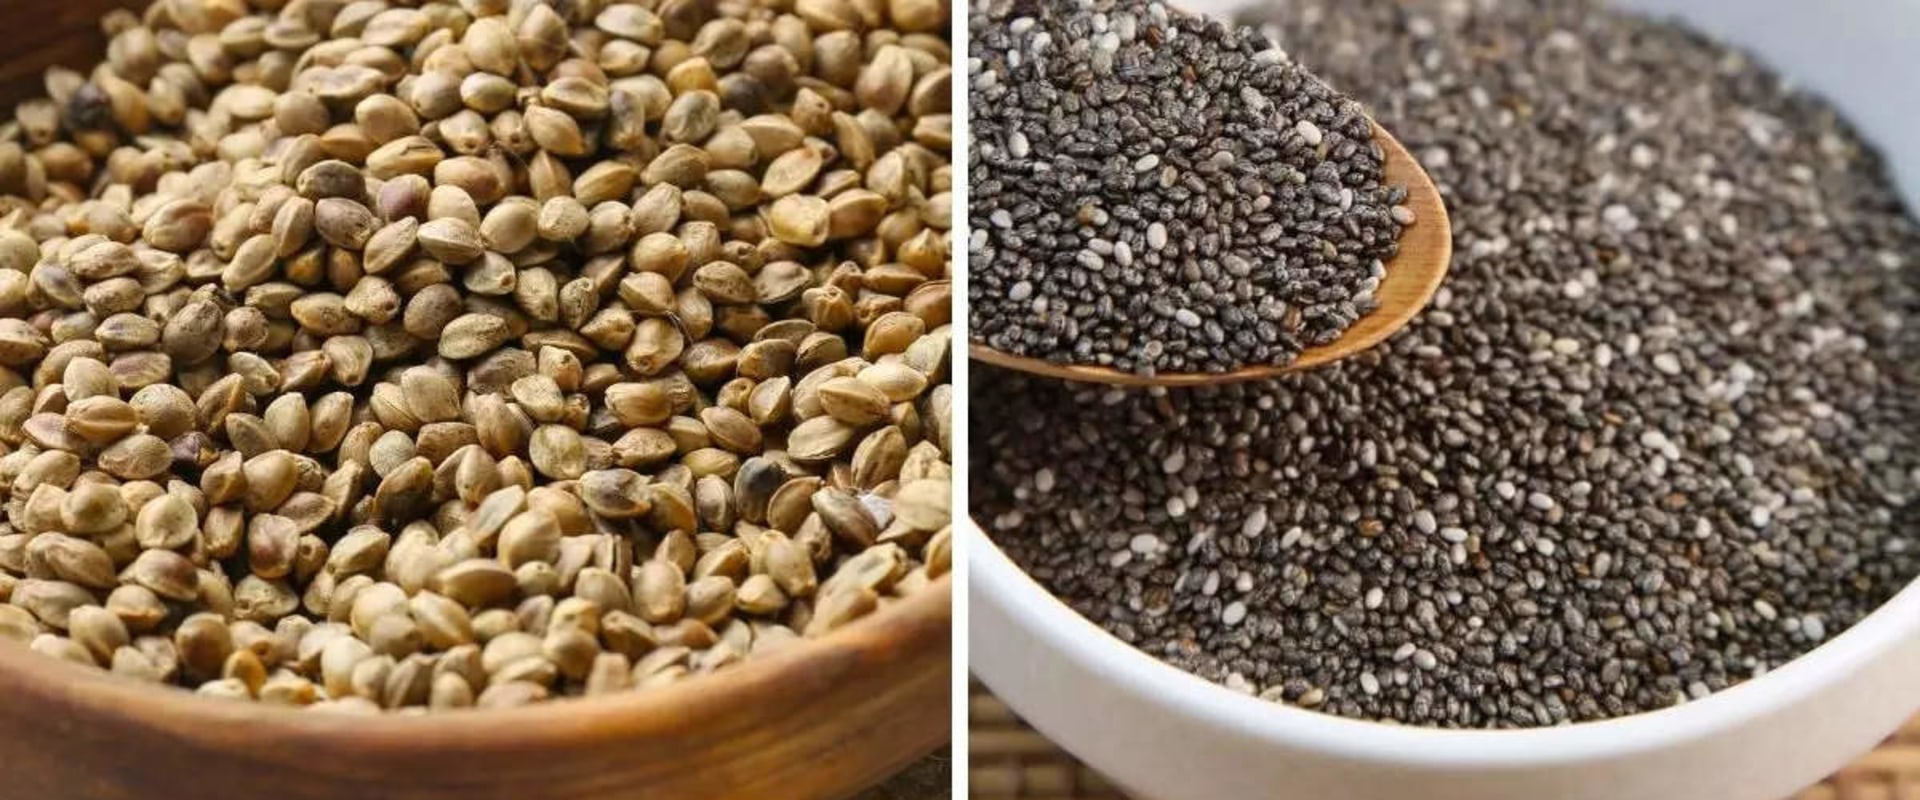 Chia Seeds vs Hemp Seeds: Which is Healthier?